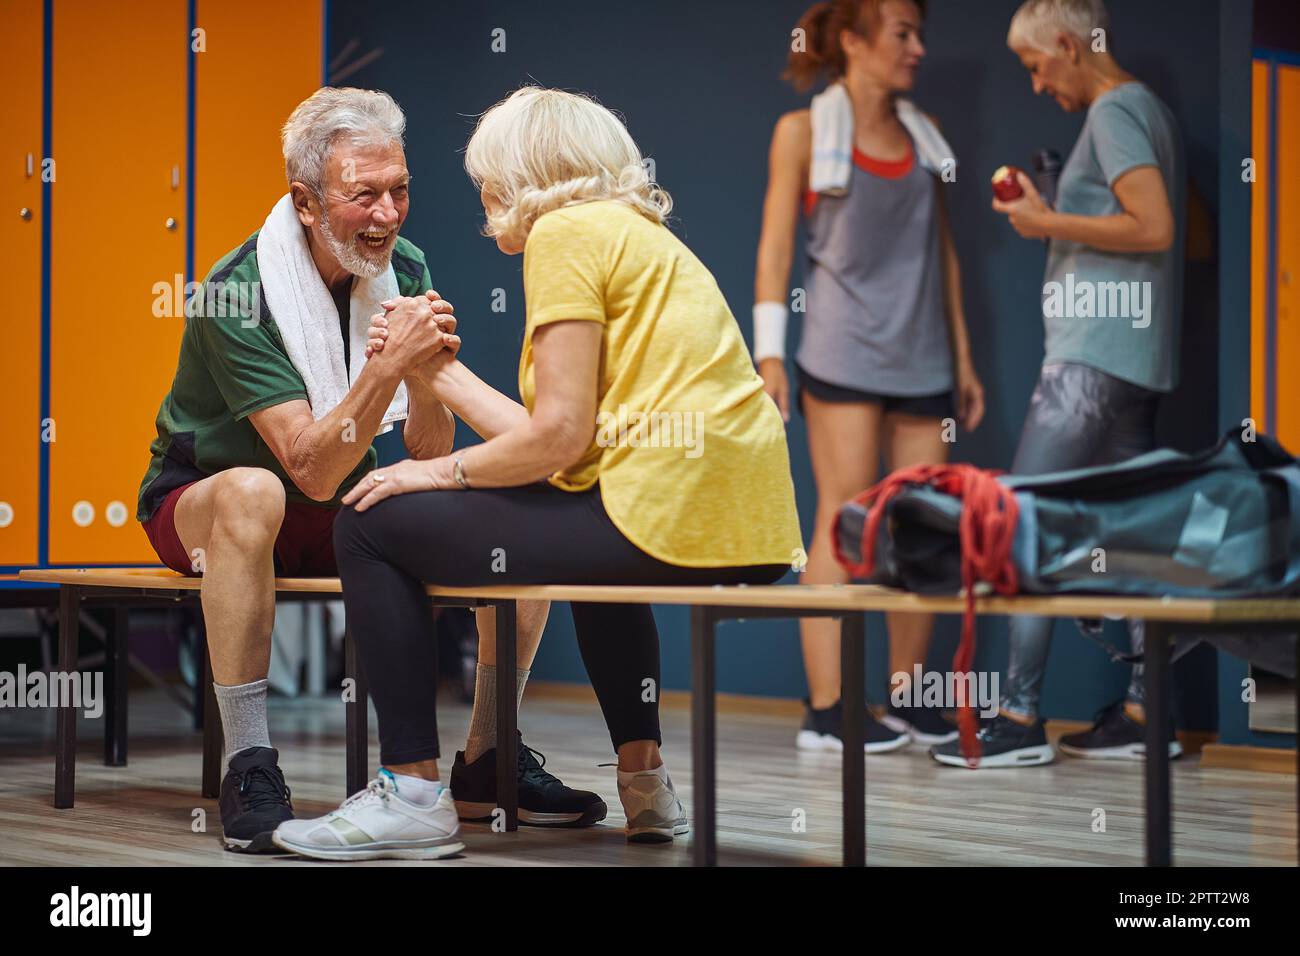 Senior man and woman arm wrestling and having fun in gym locker room. Health, wellness, active lifestyle concept. Stock Photo